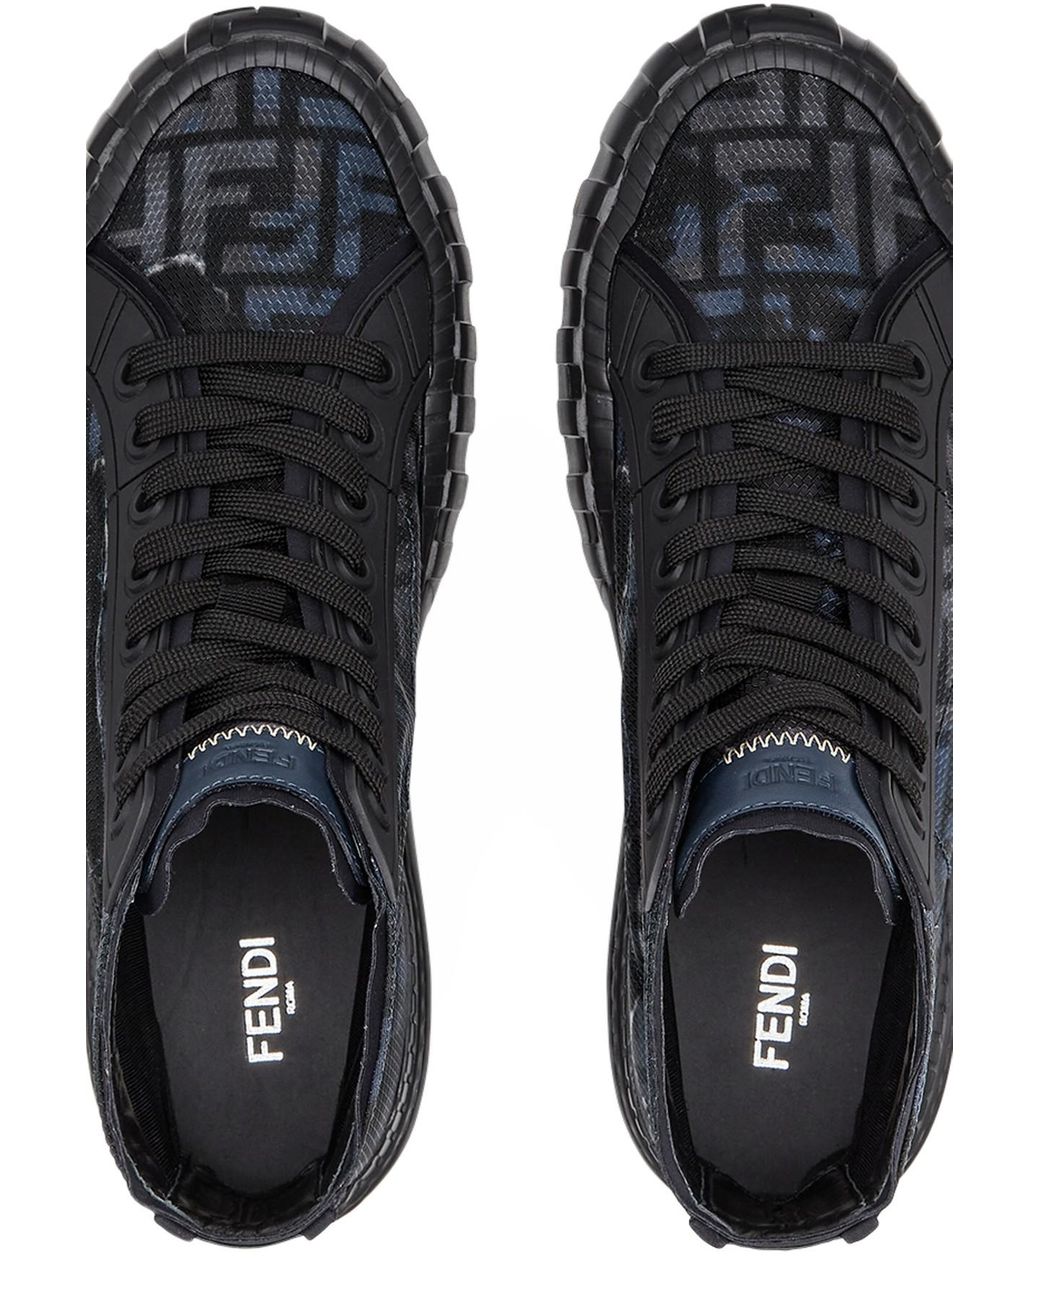 Fendi Synthetic Force High-tops in Black for Men - Lyst